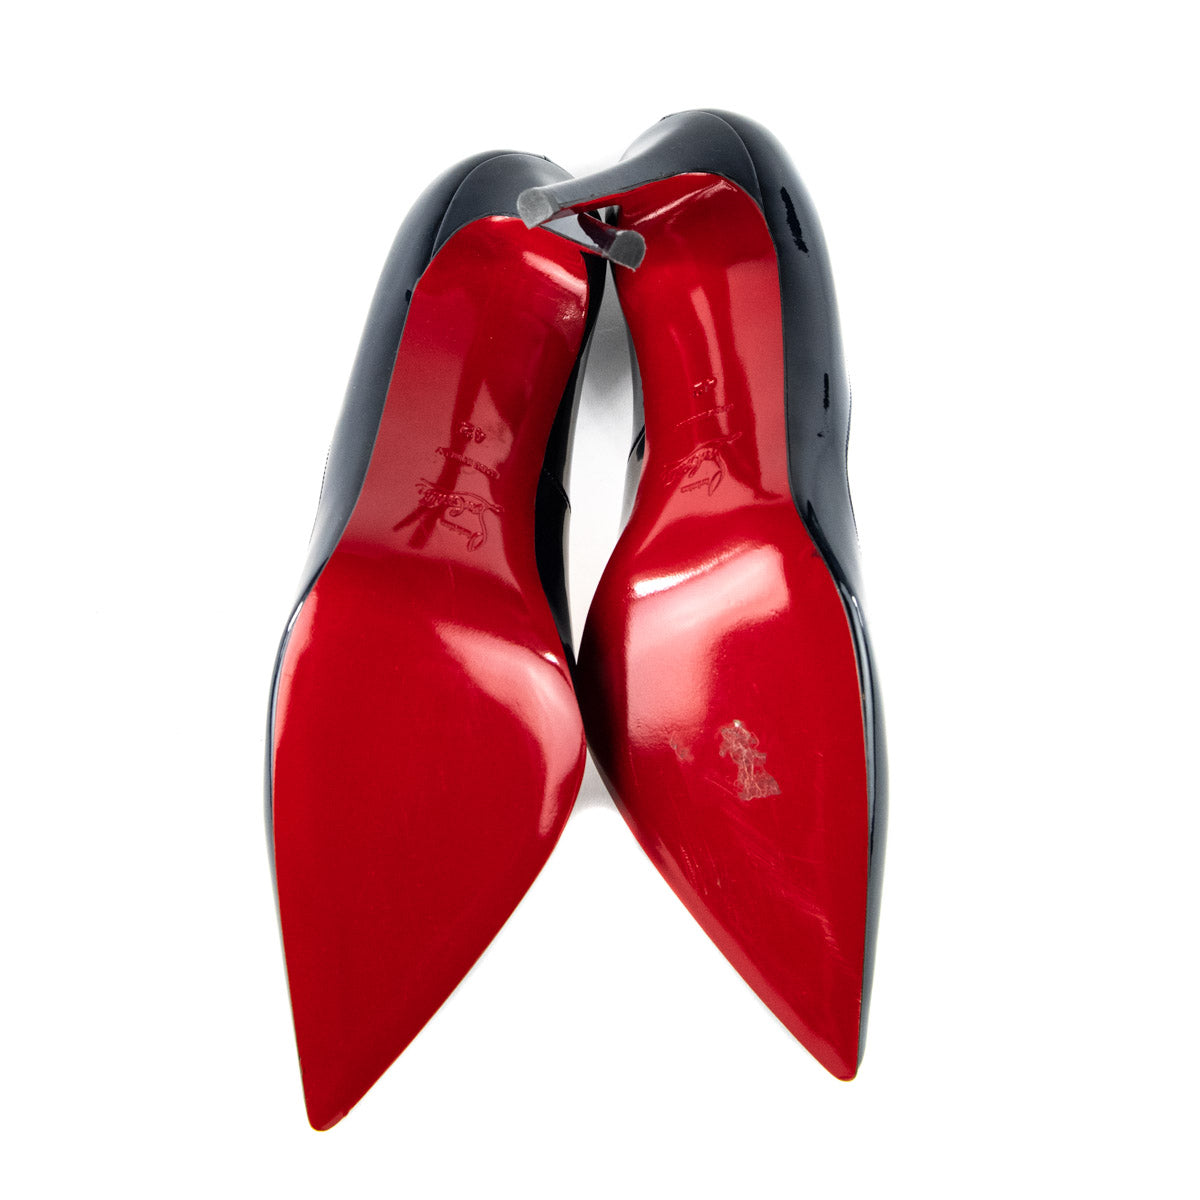 Party on the Bottom -  Louboutin so kate outfit, So kate louboutin, Red  bottom heels outfit